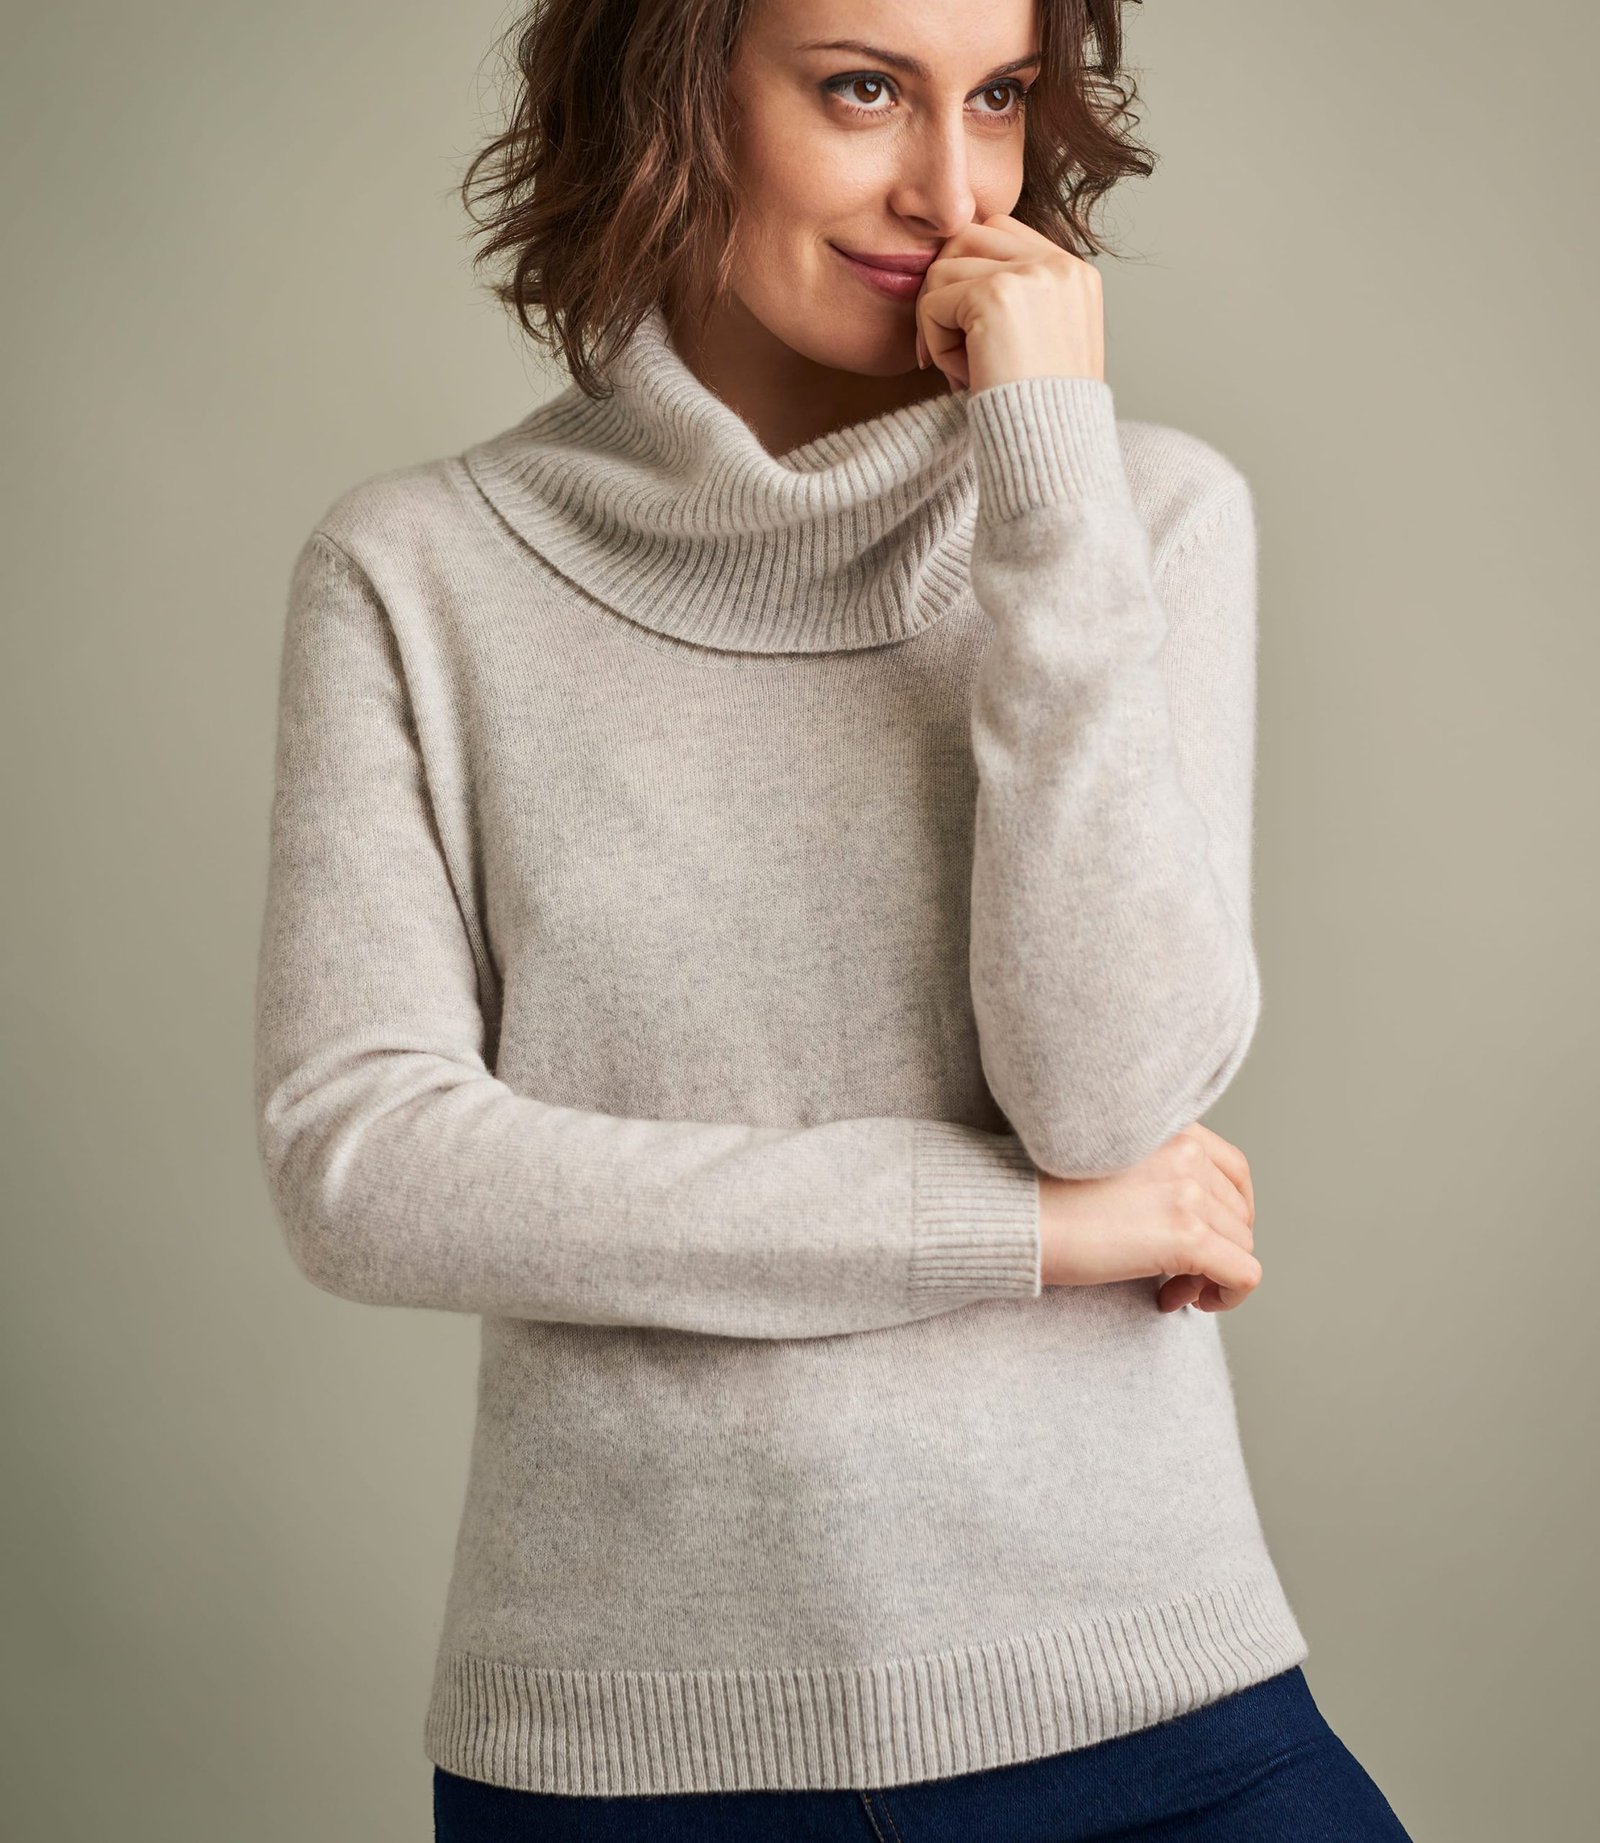 Know The Benefits of Wearing the Women’s Cashmere